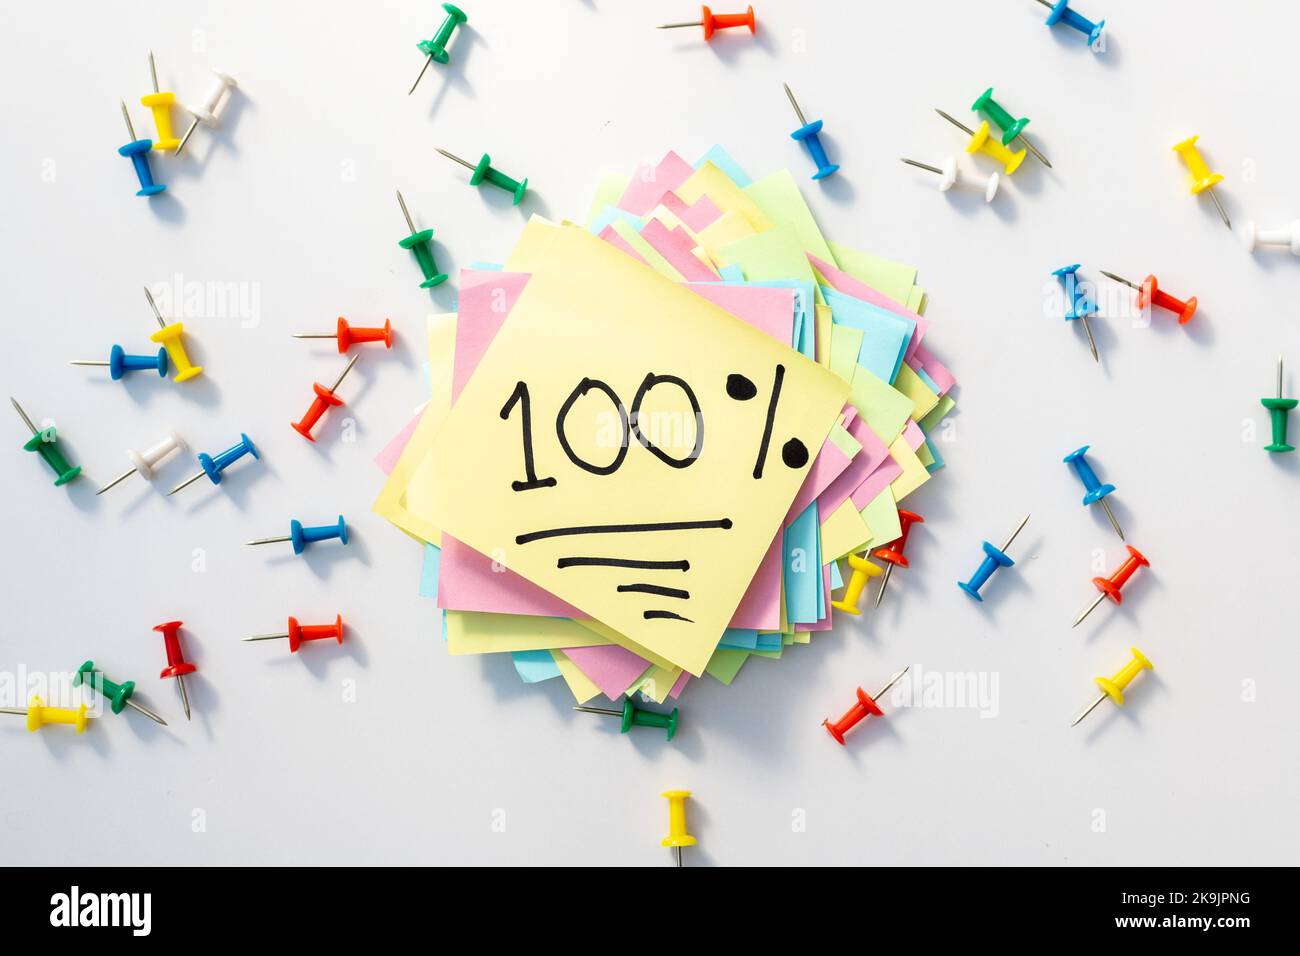 A hundred percent number written in words on a yellow sticky note Stock Photo